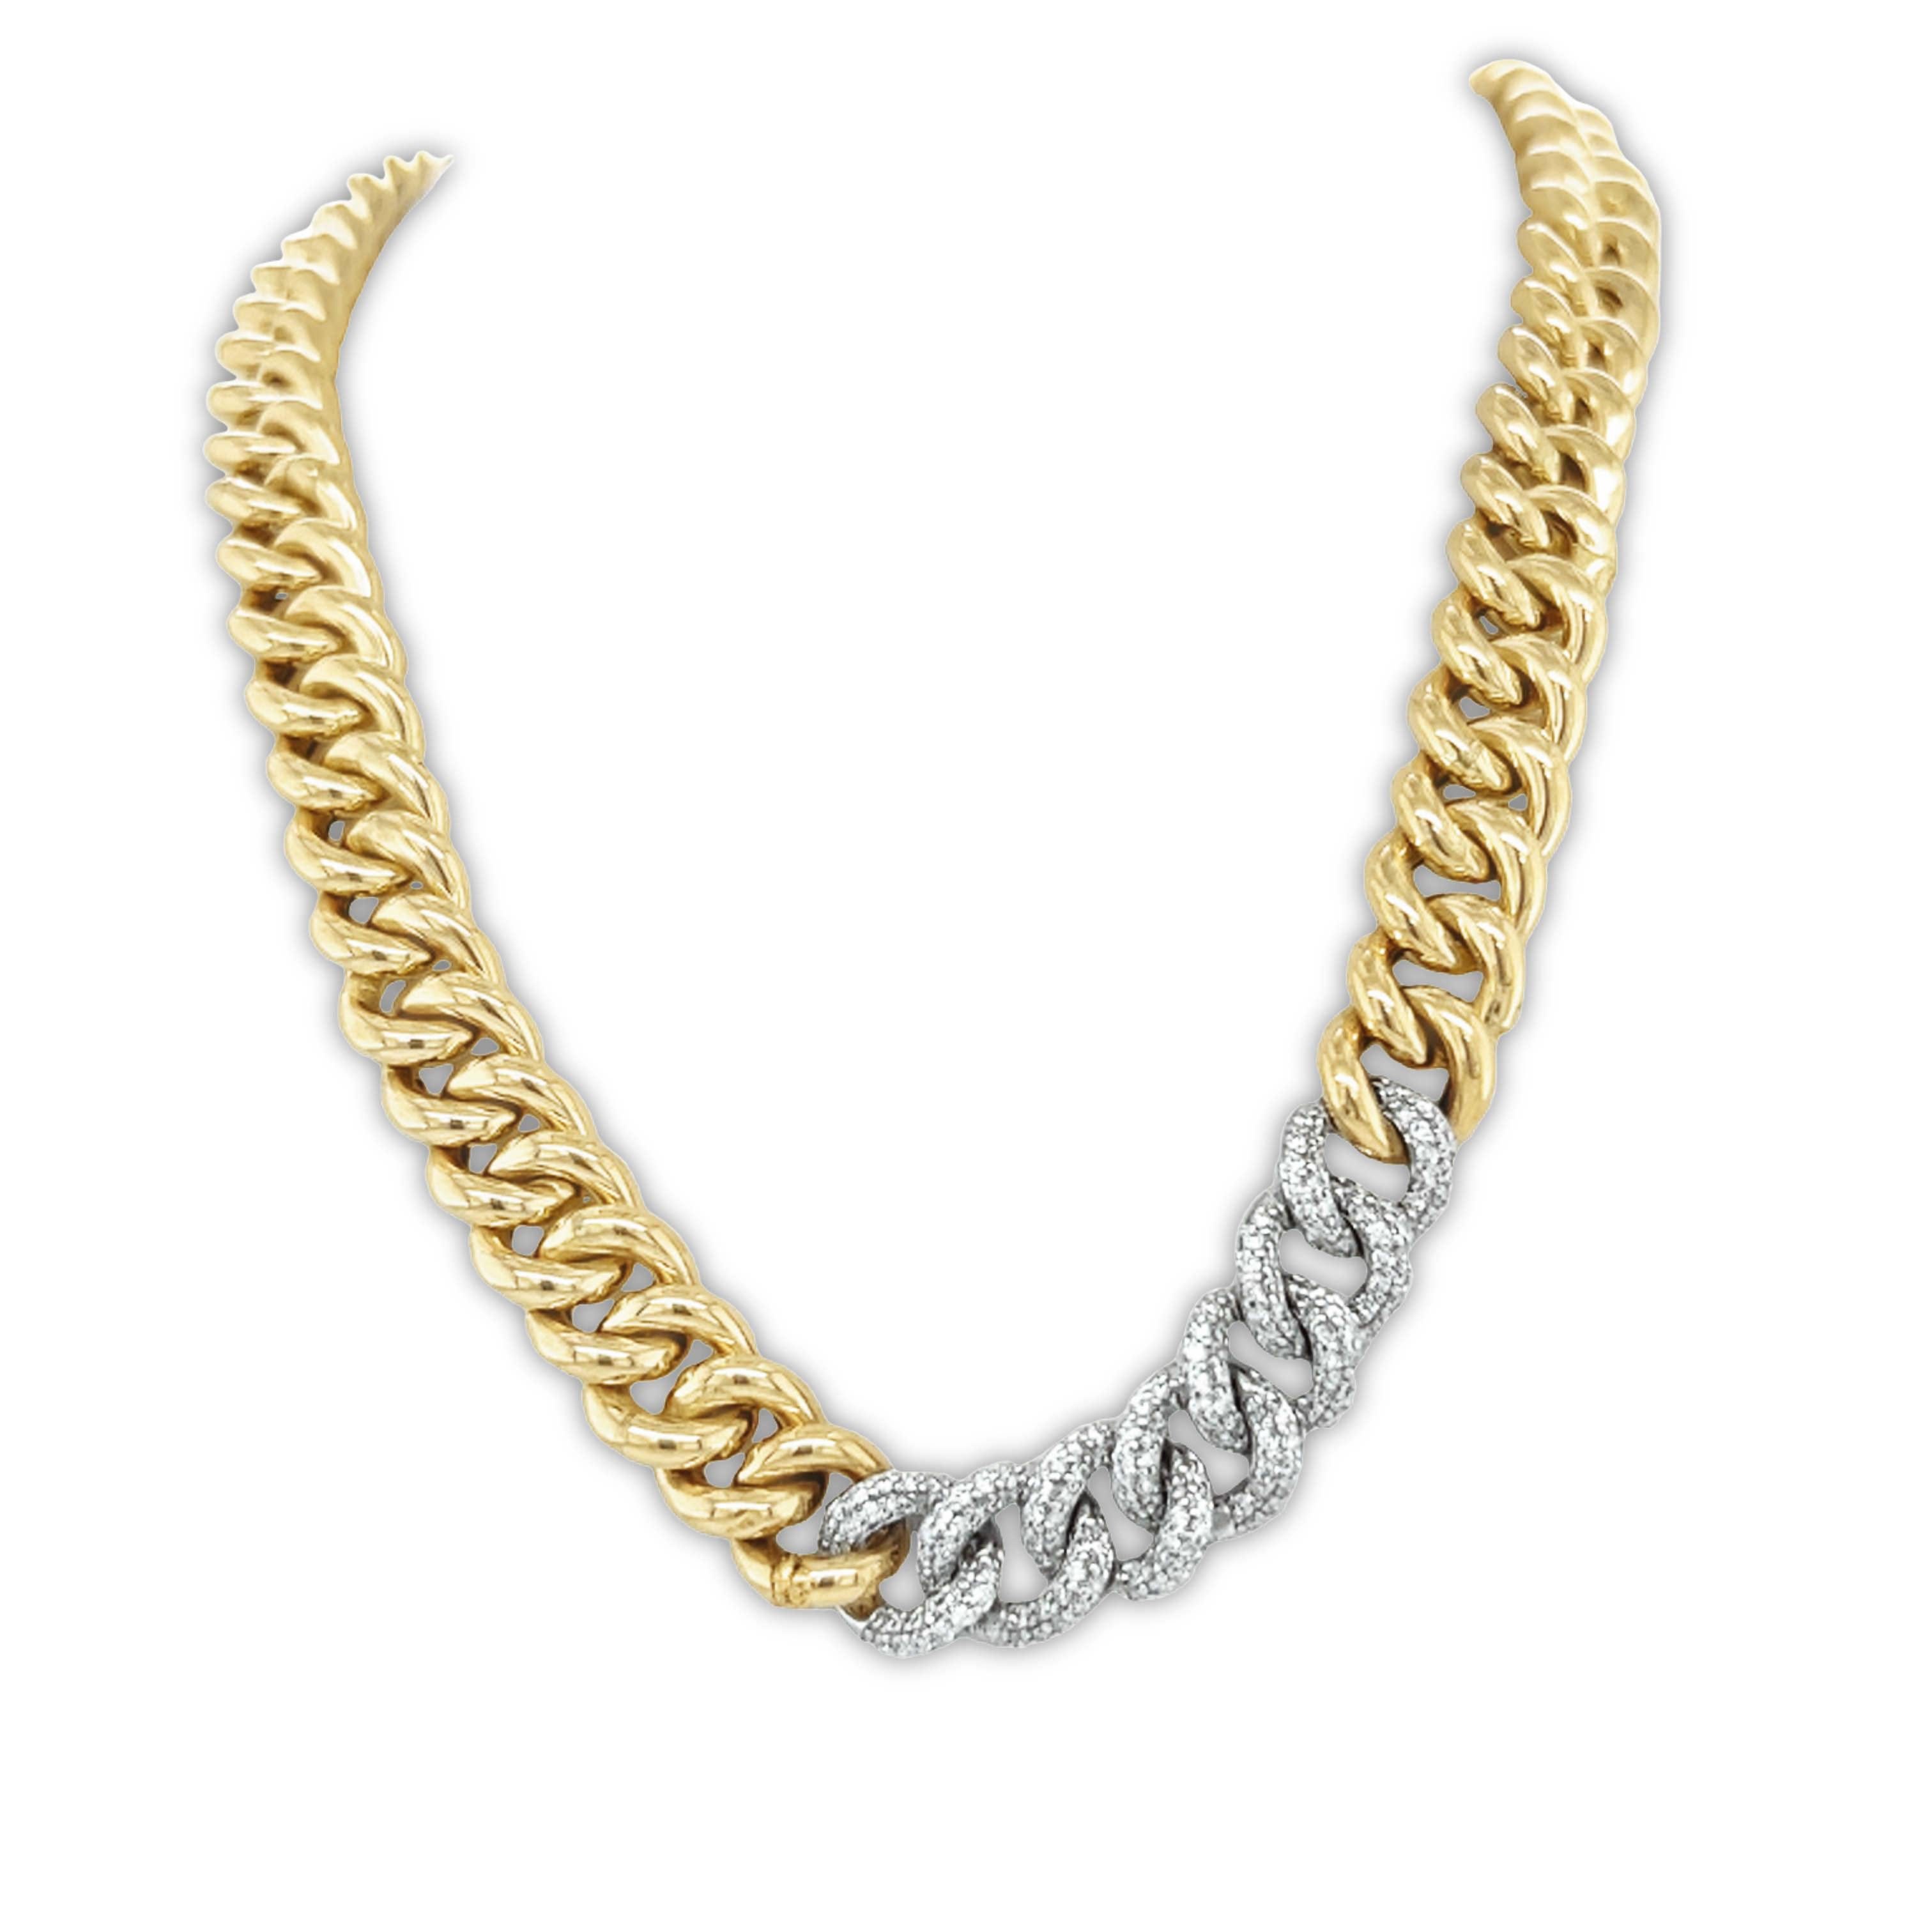 Featured image for “Cuban Link Chain with White Gold and Pavé Diamond Segment”